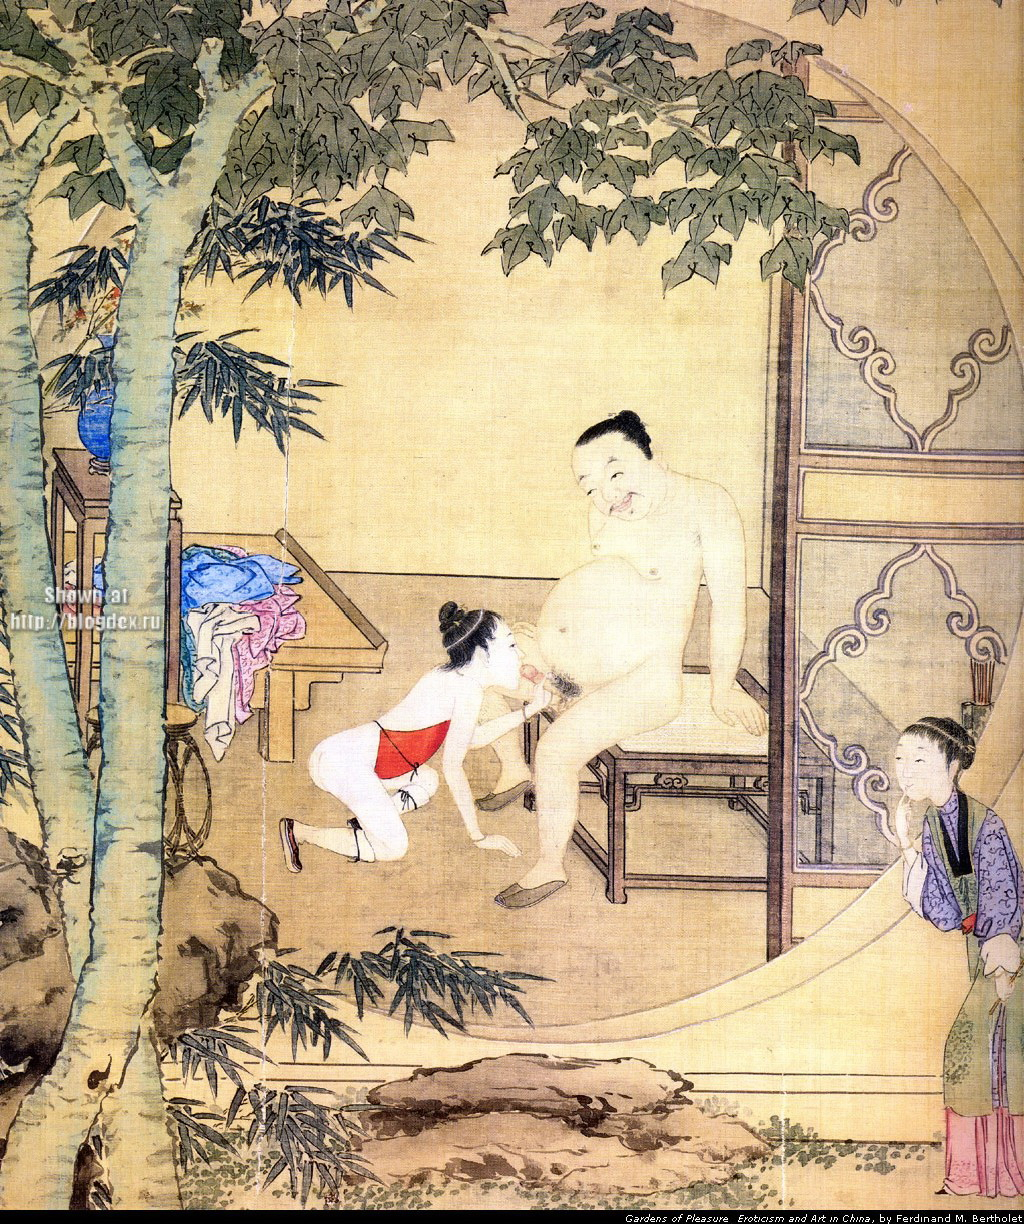 Asian Sex Painting - Ancient Chinese (51 photos) - sex and porn